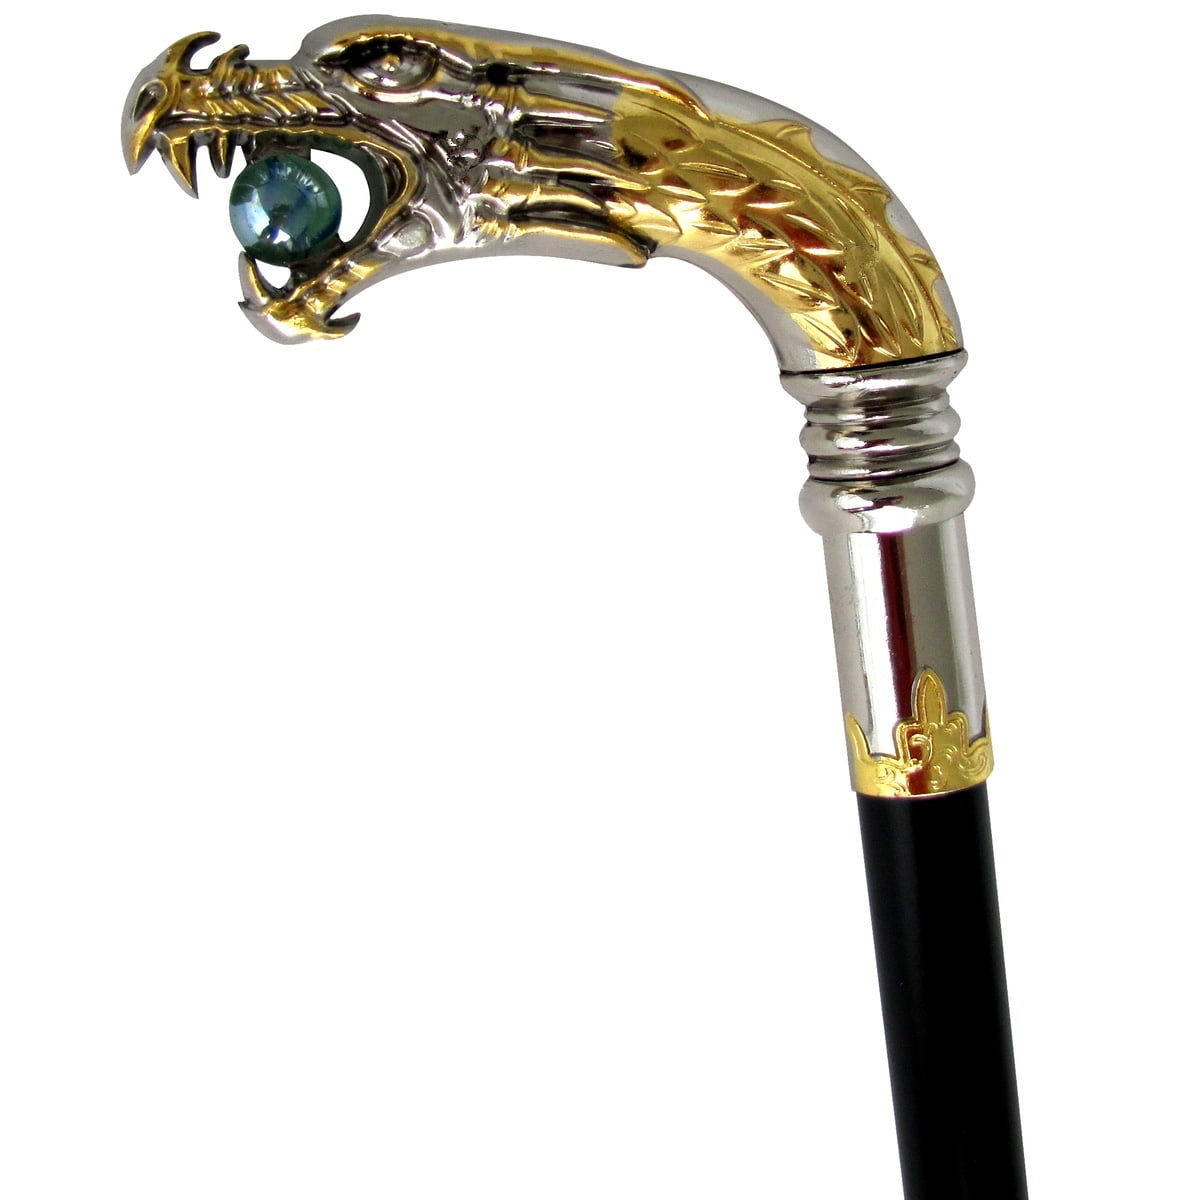 SILVER NICKEL PLATED DRAGON HEAD WALKING STICK VINTAGE WOODEN CANE HANDLE STICK 